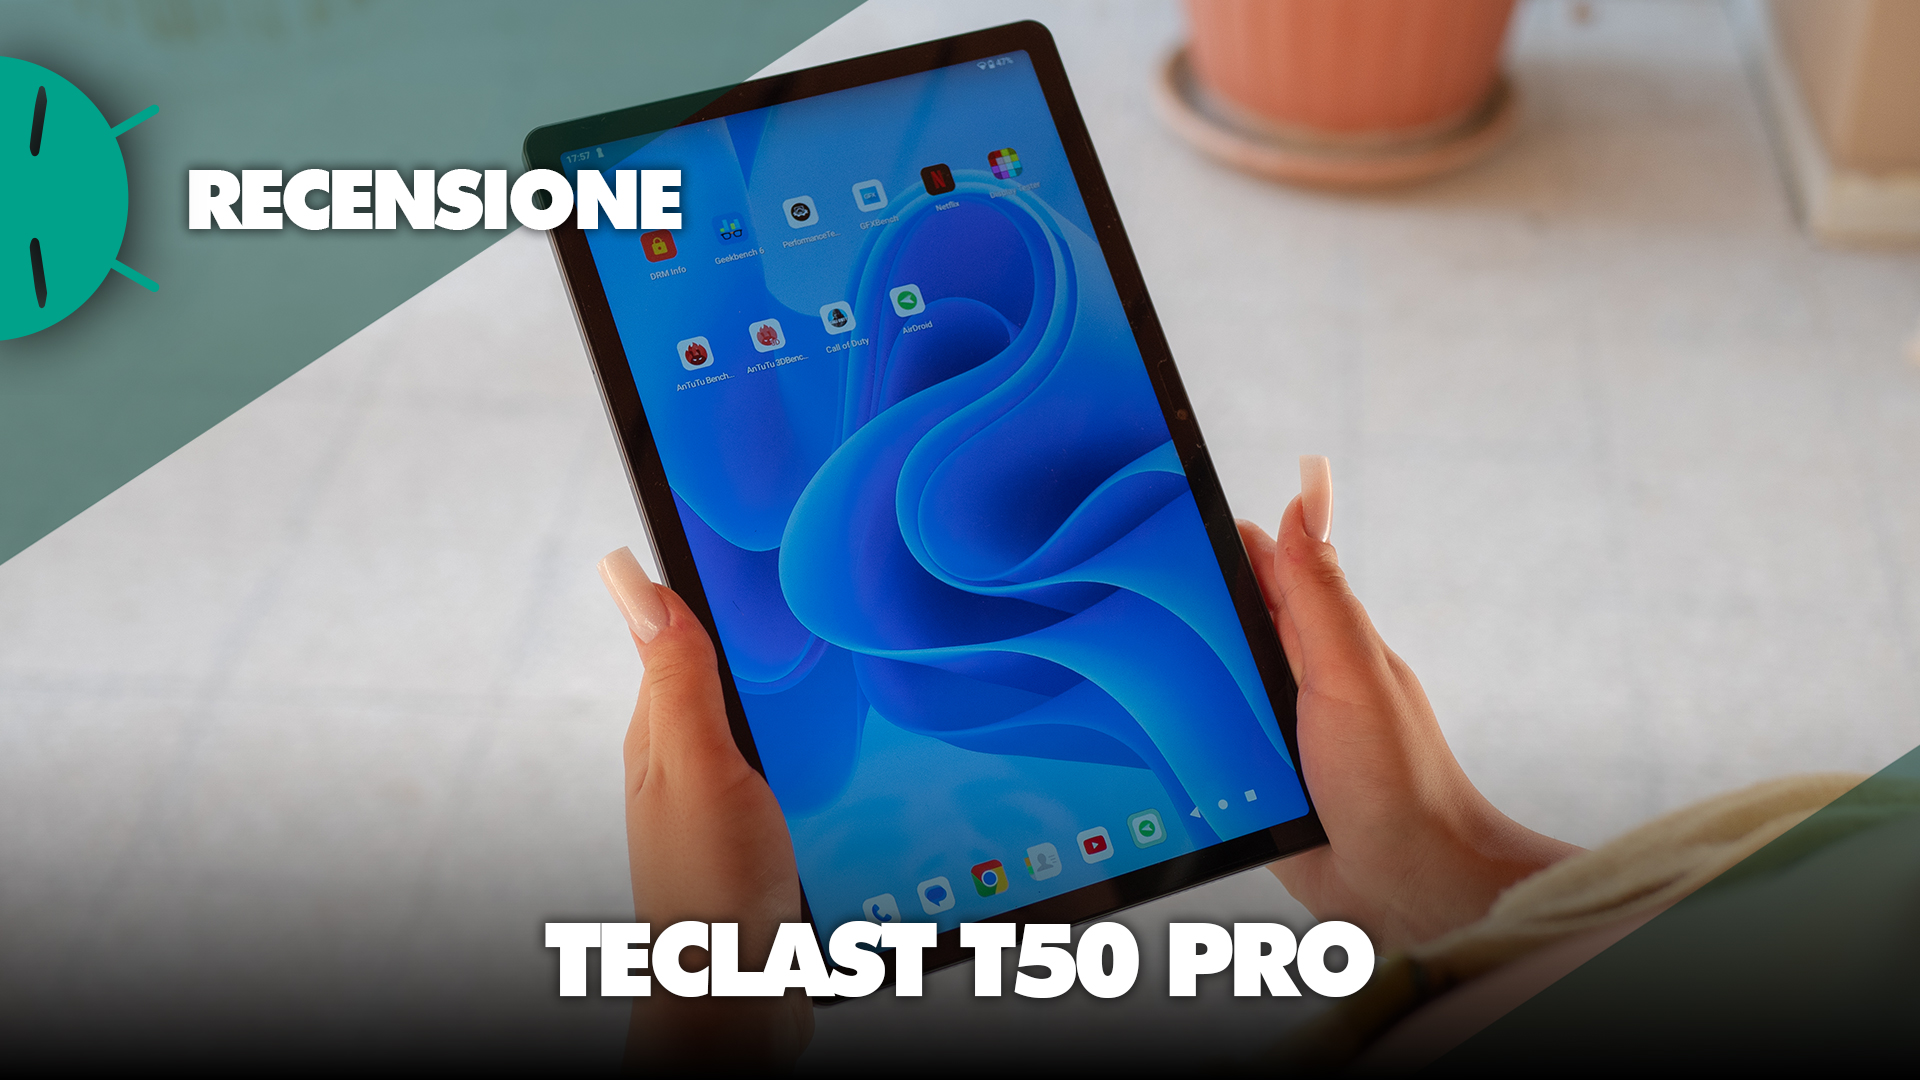 Teclast T50 Pro review: the DEFINITIVE low-cost TABLET! - GizChina.it